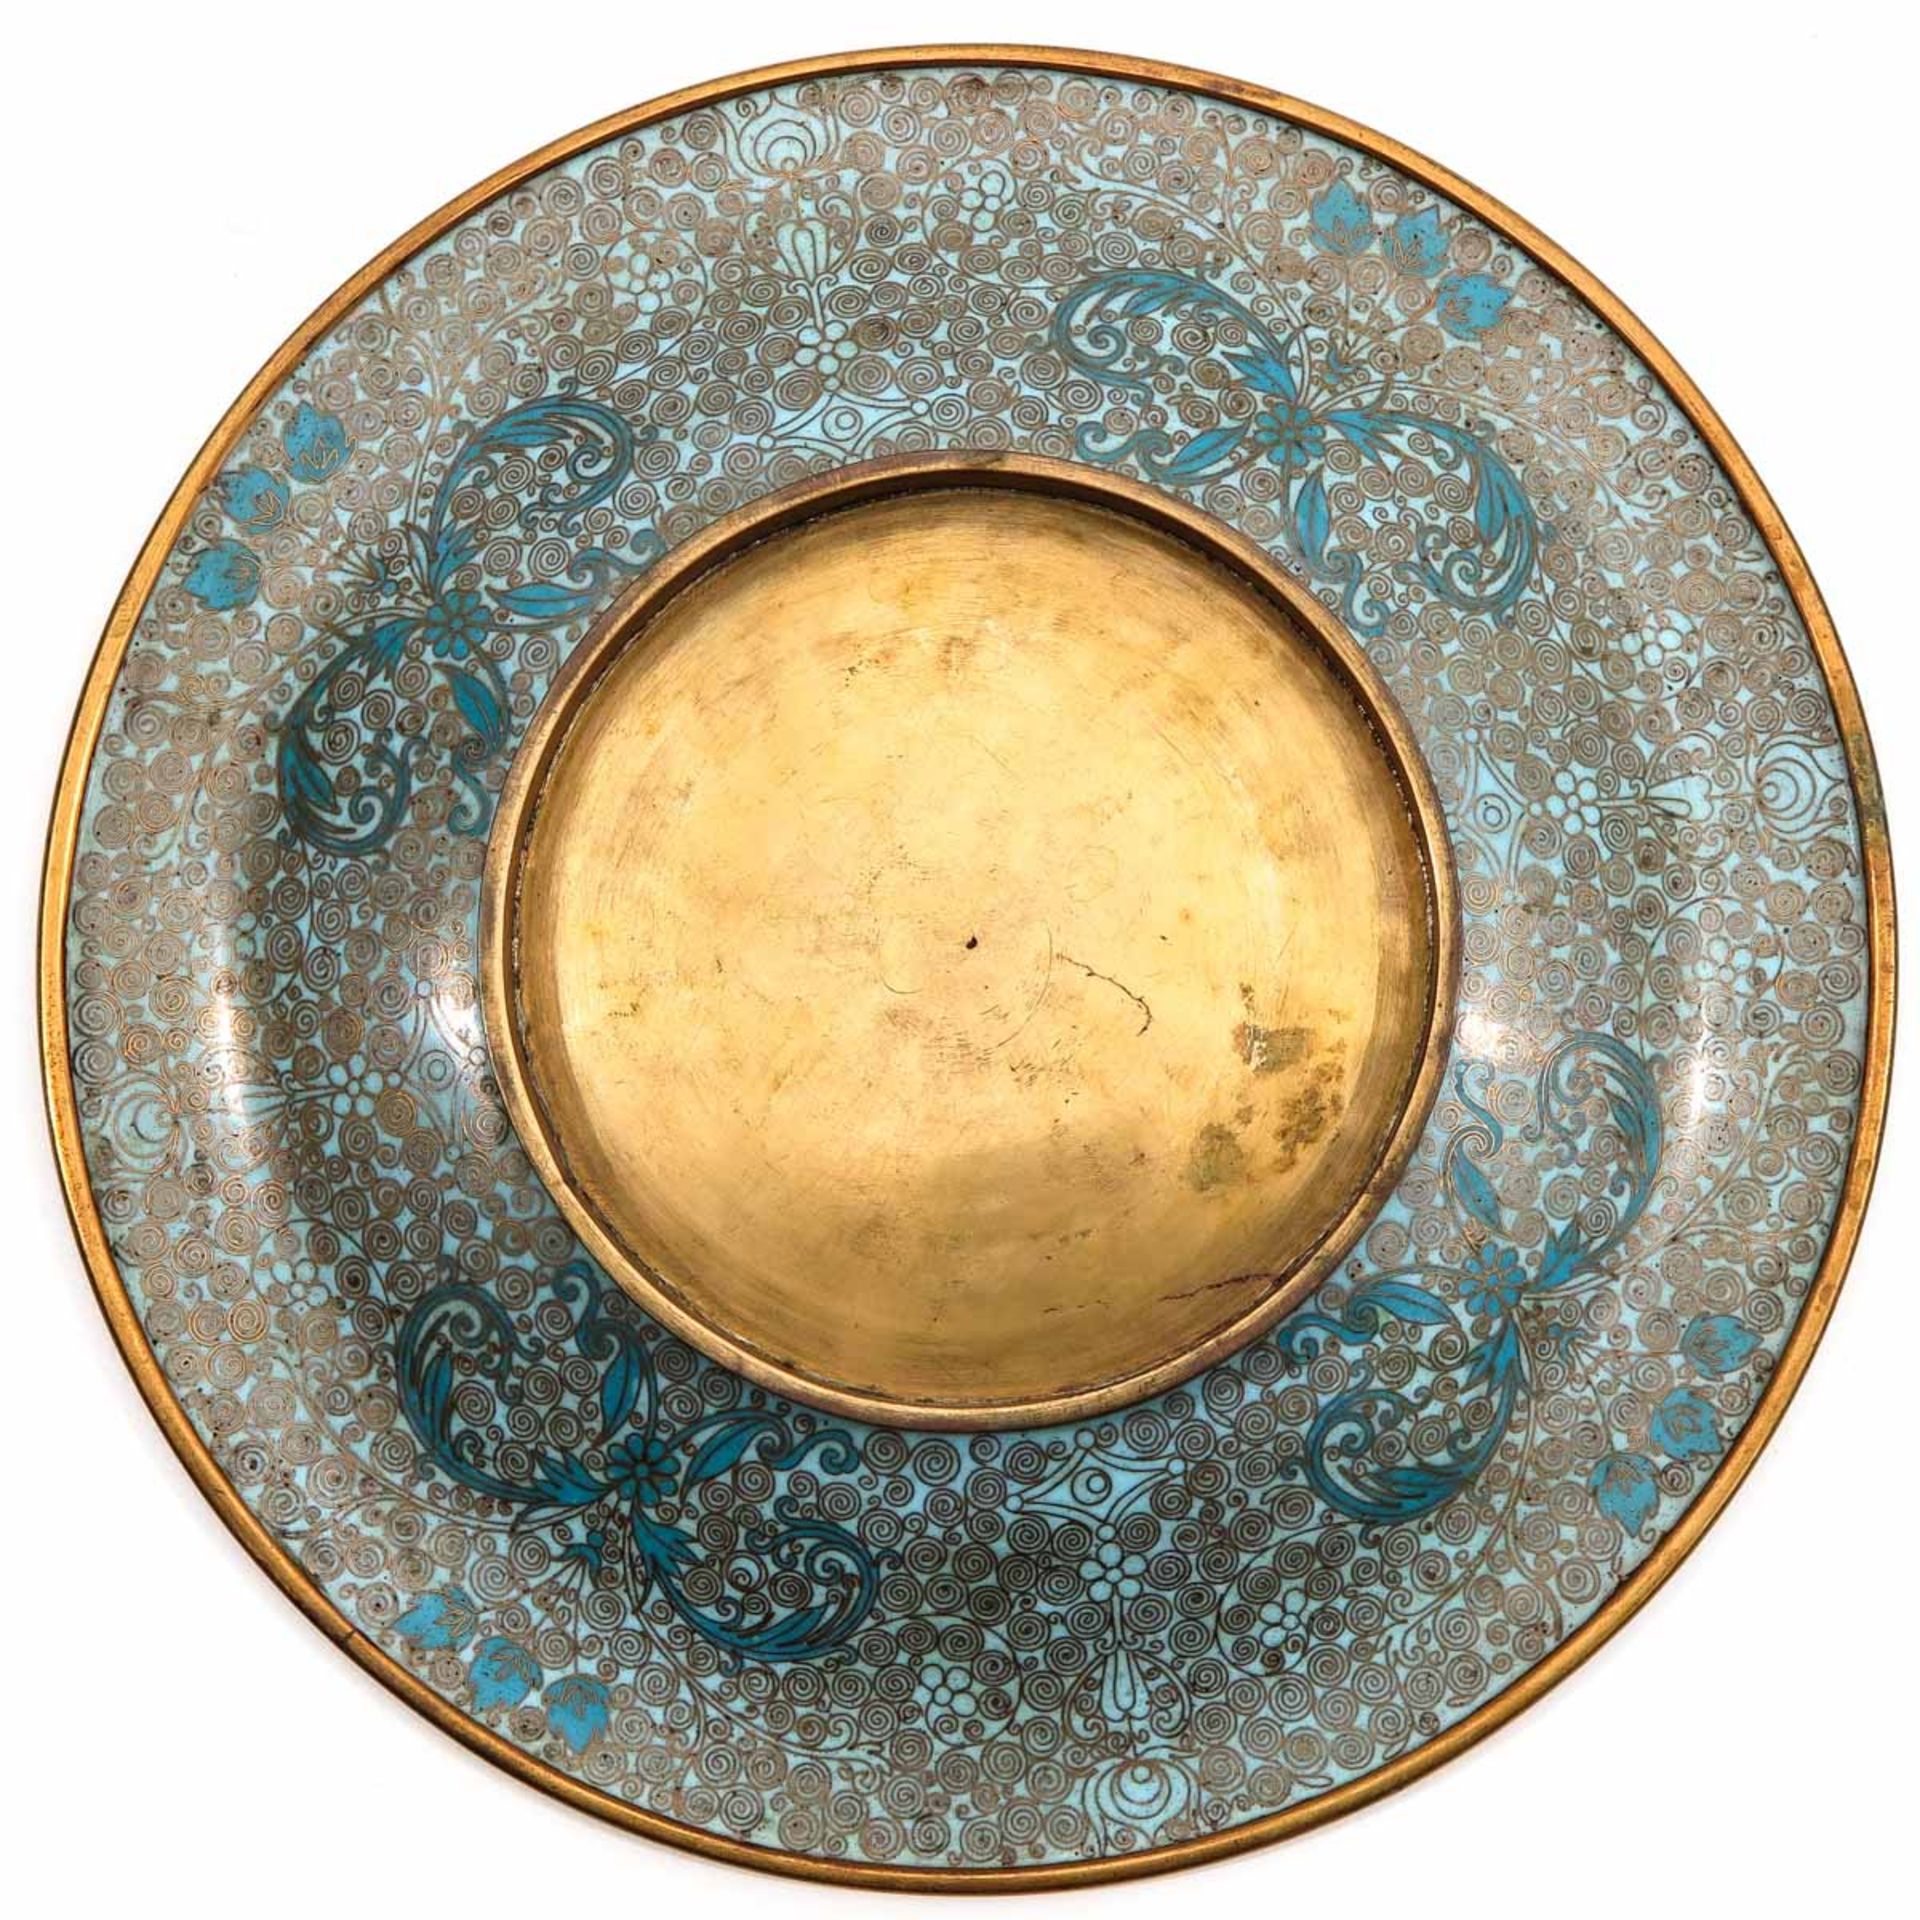 A Cloisonne Dish - Image 2 of 5